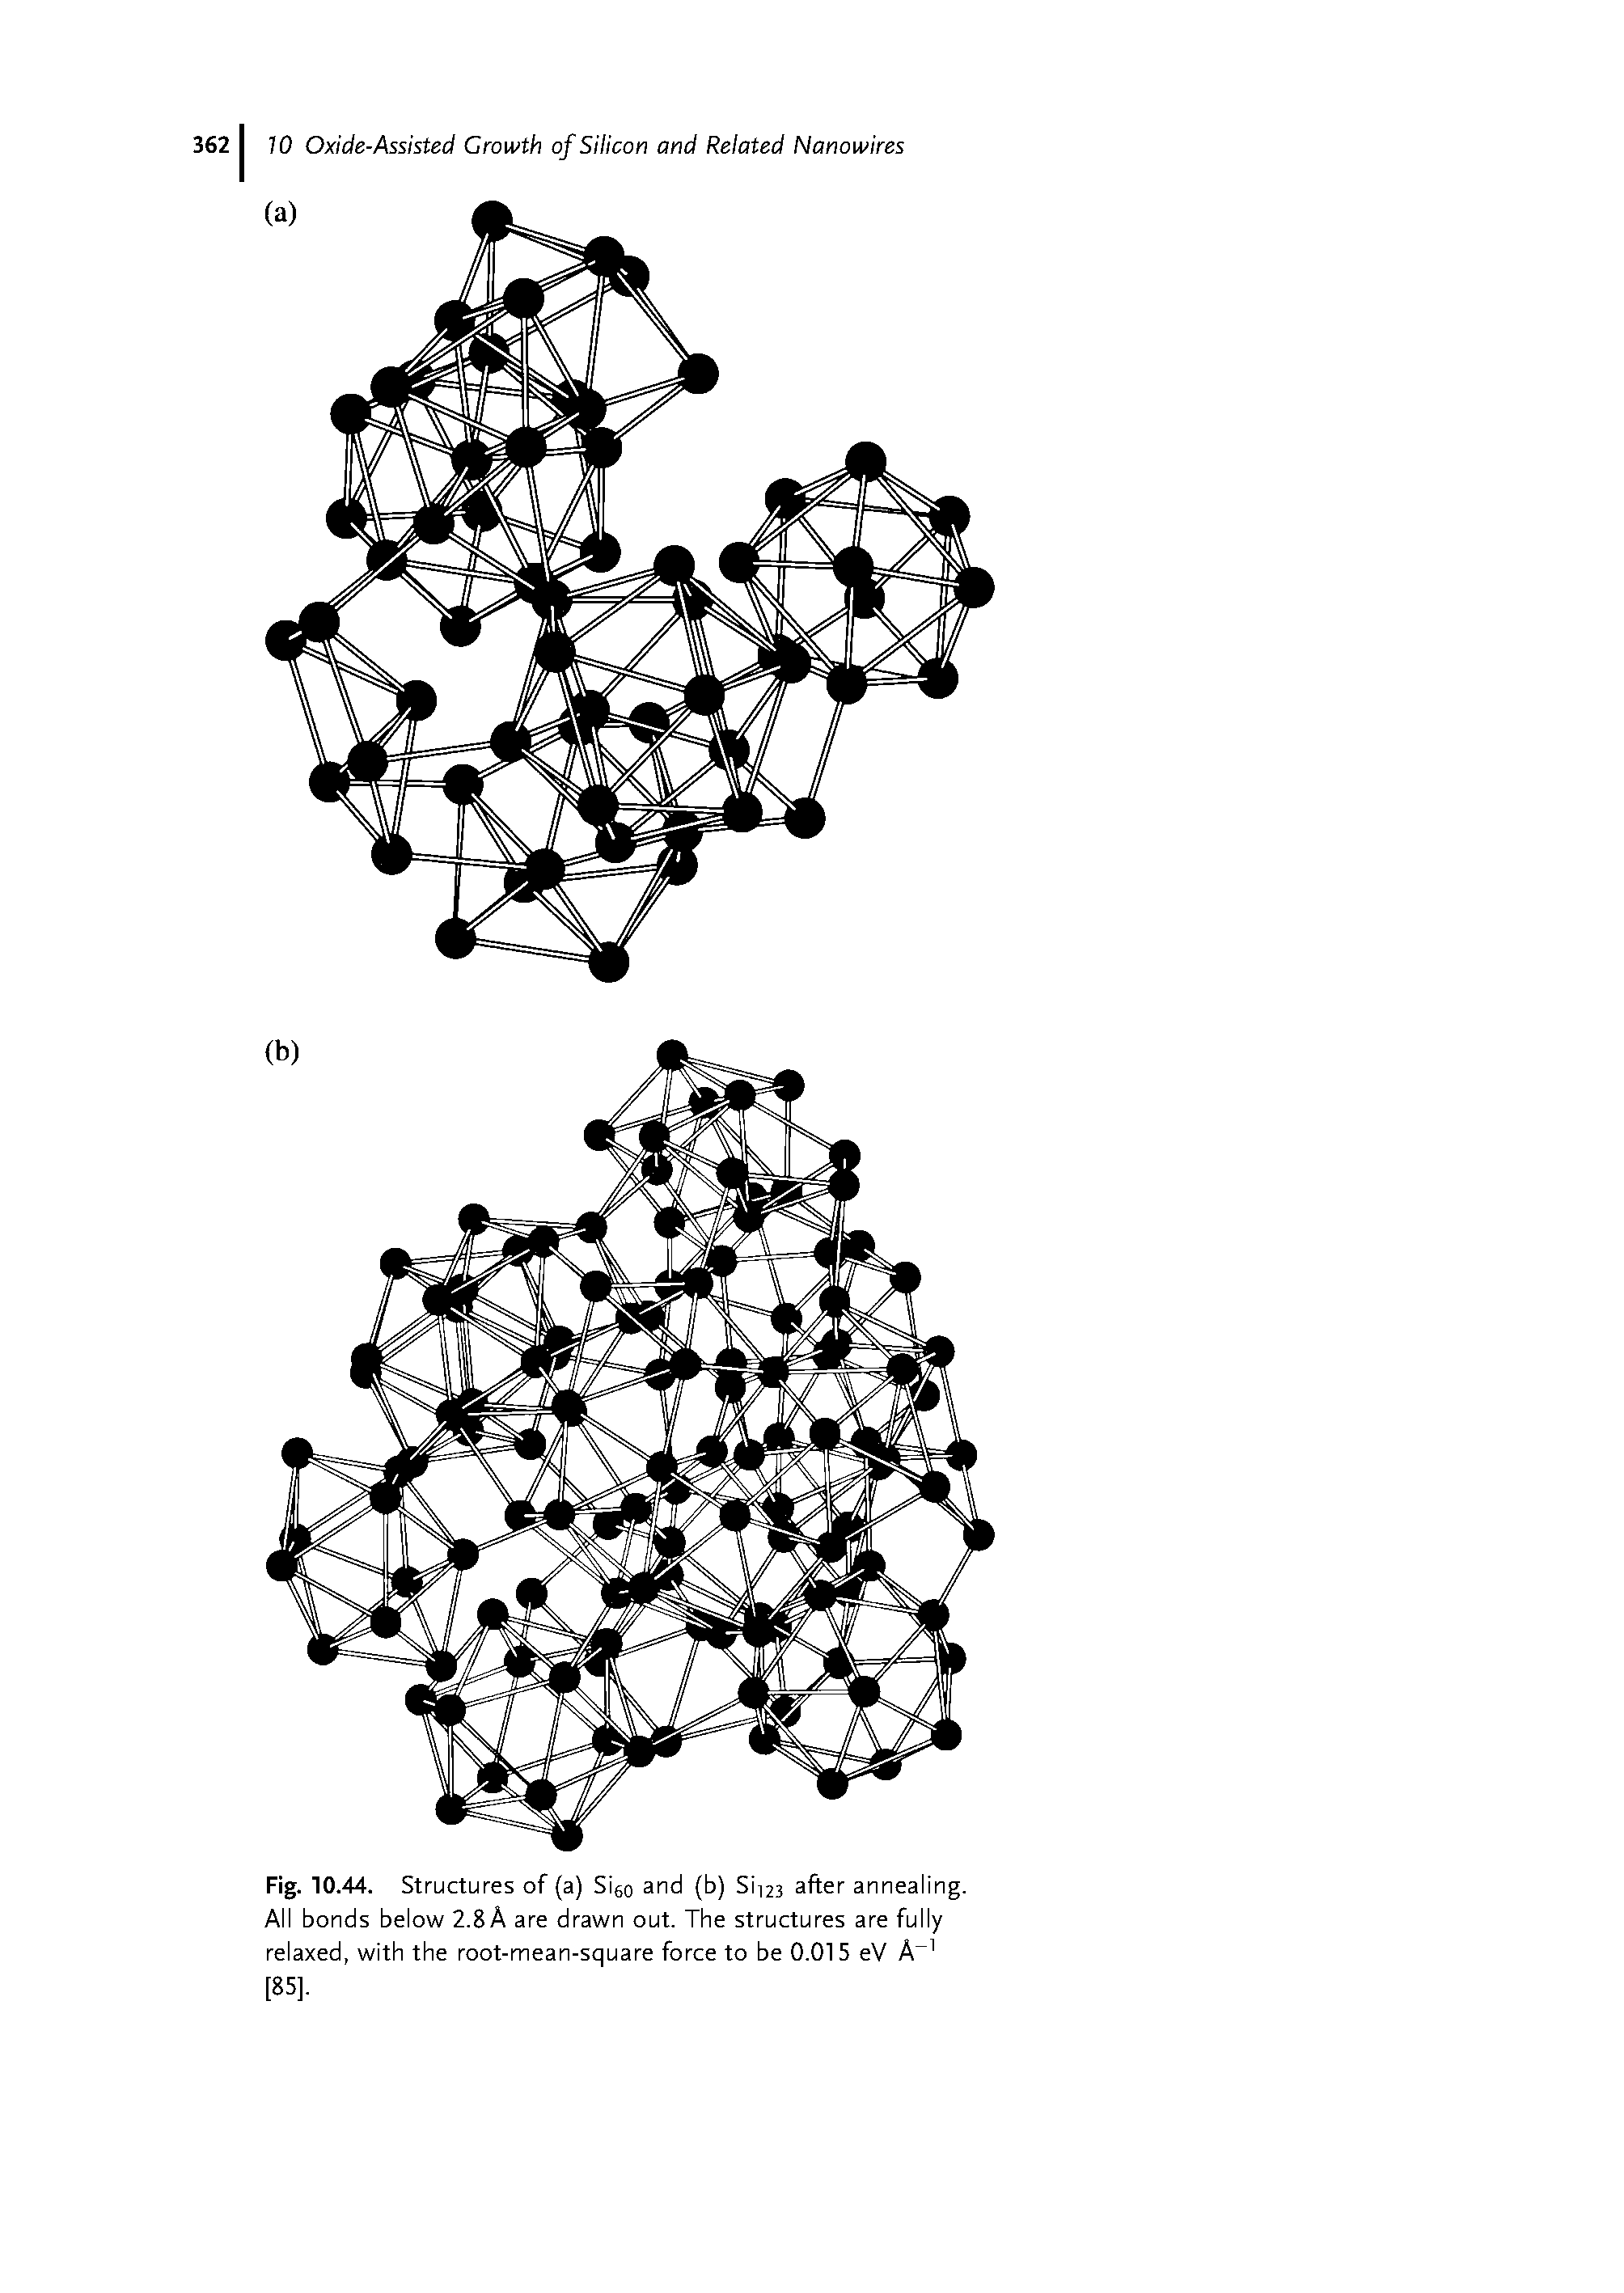 Fig. 10.44. Structures of (a) Sieo and (b) Sii23 after annealing. All bonds below 2.8A are drawn out. The structures are fully relaxed, with the root-mean-square force to be 0.015 eV A [85].